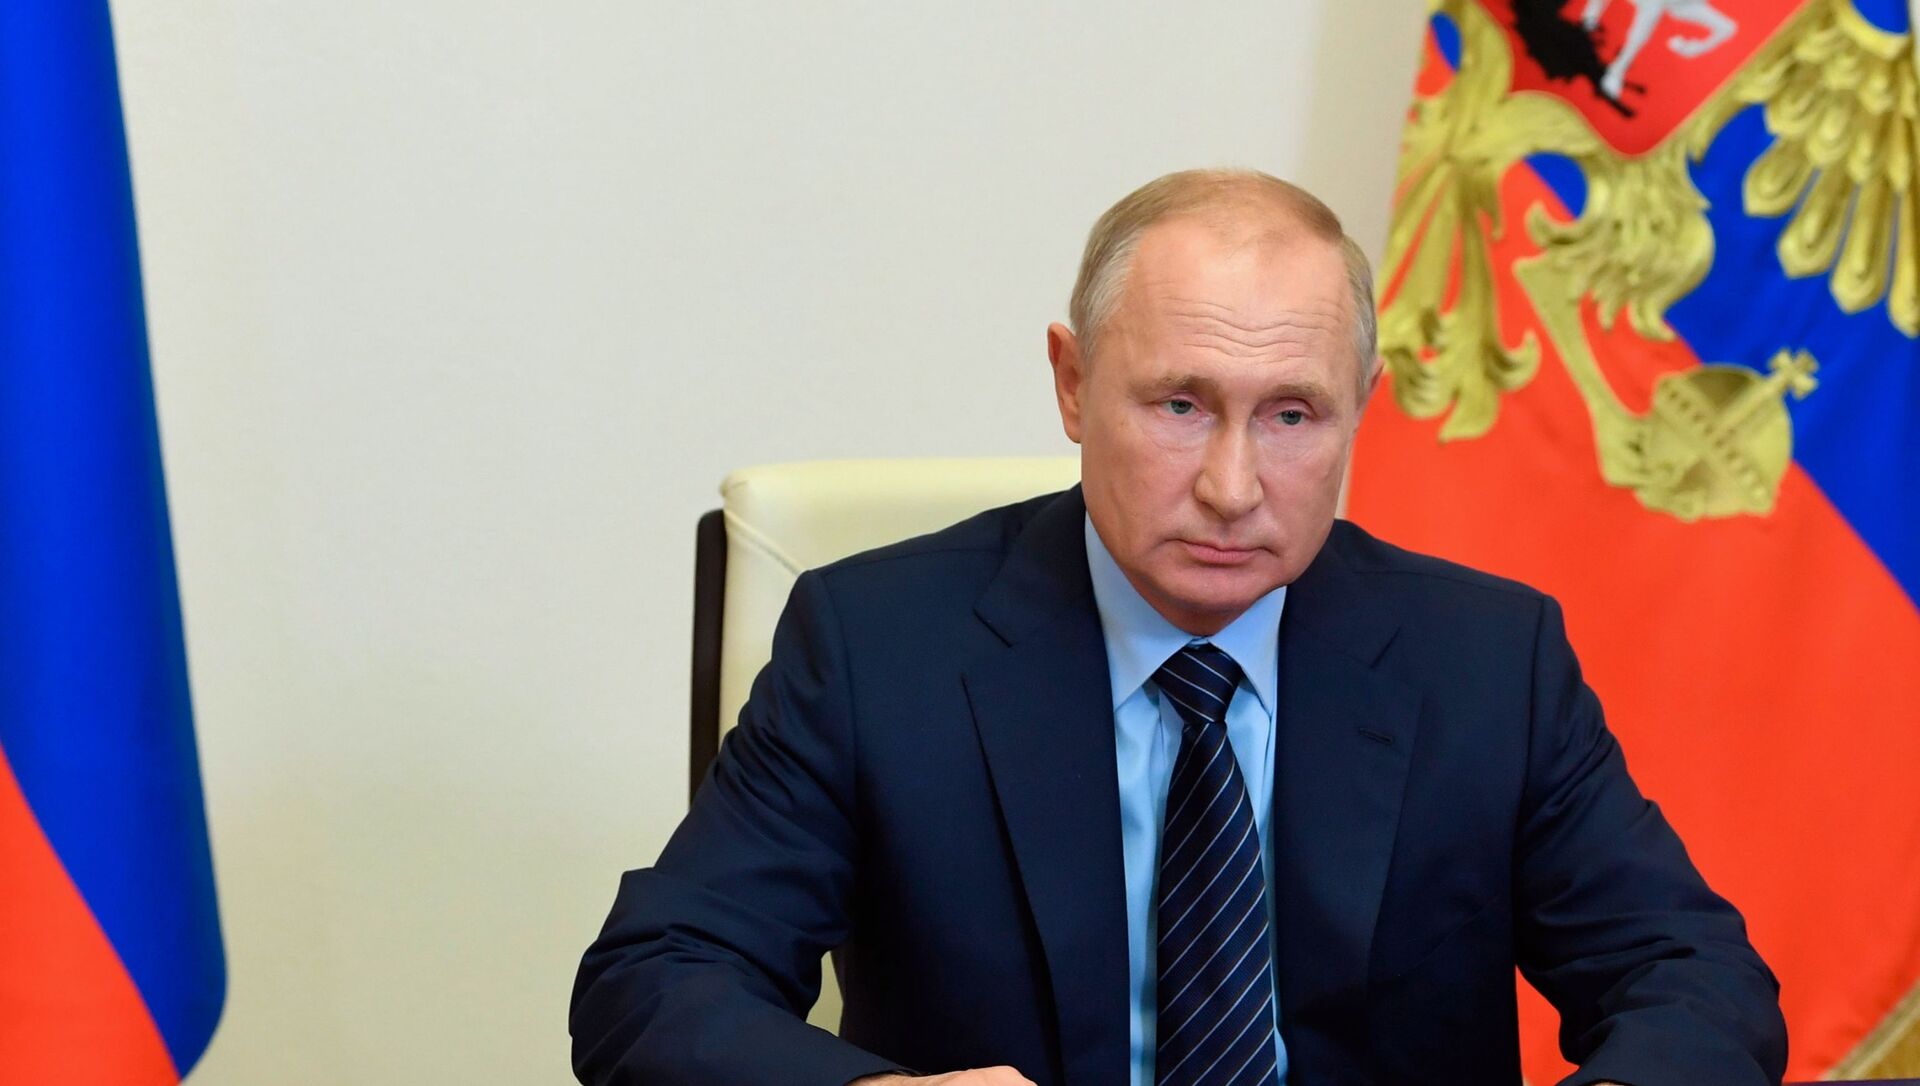 The West is killing itself economically by stopping dependence on Russian energy- Putin